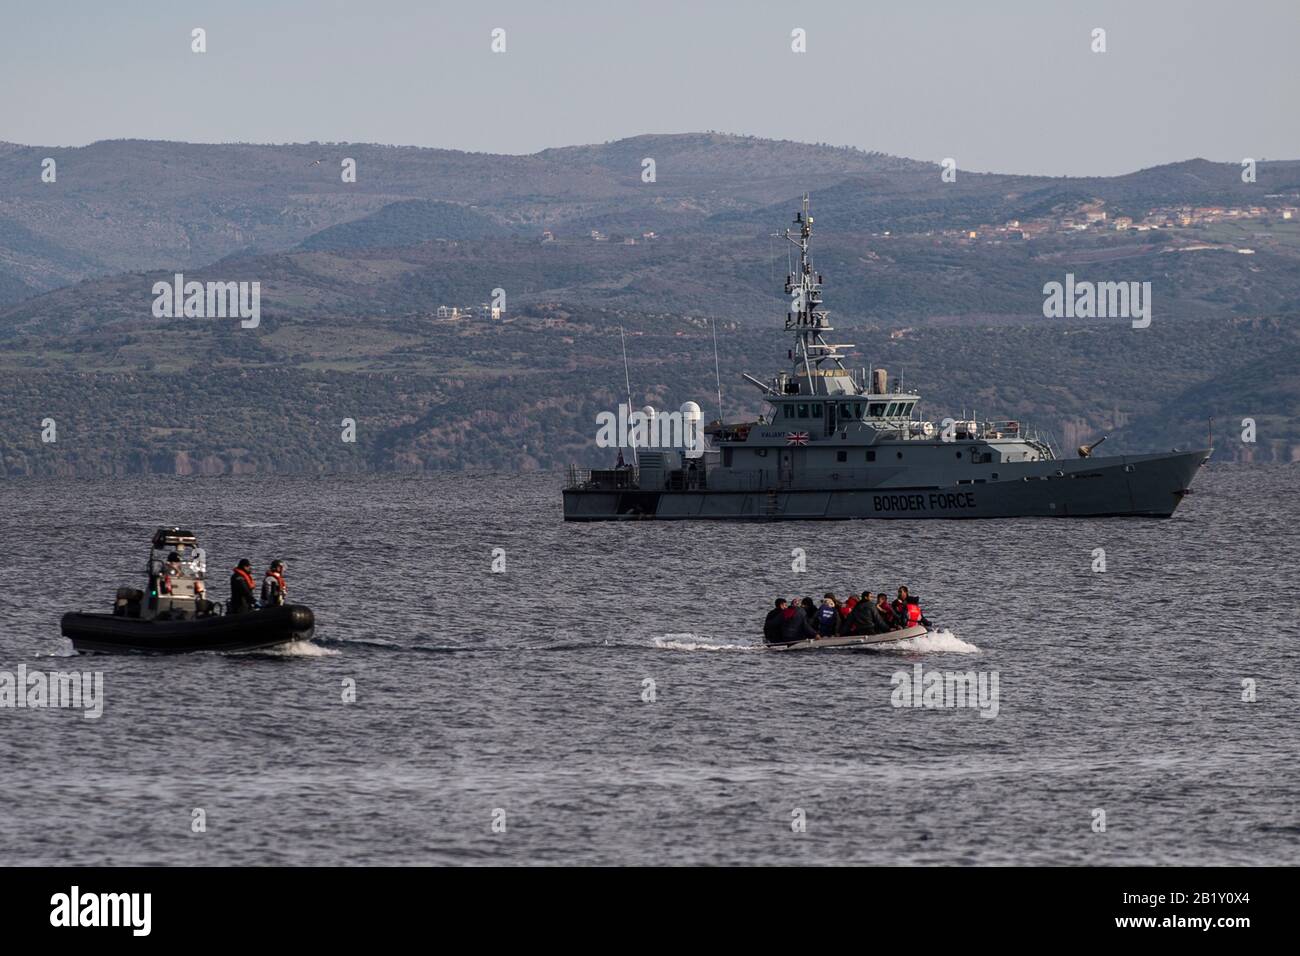 Lesbos, Greece. 28th Feb, 2020. A boat with 15 Afghan refugees, five children, three women and seven men, arrives on the Greek island of Lesbos, in front of the patrol boat of the British border troops HMC Valiant, which is part of the Frontex mission. According to the state news agency Anadolu, a spokesman for the ruling Turkish party AKP barely concealed his threat to open the borders to the refugees in the country. Credit: Angelos Tzortzinis/dpa/Alamy Live News Stock Photo